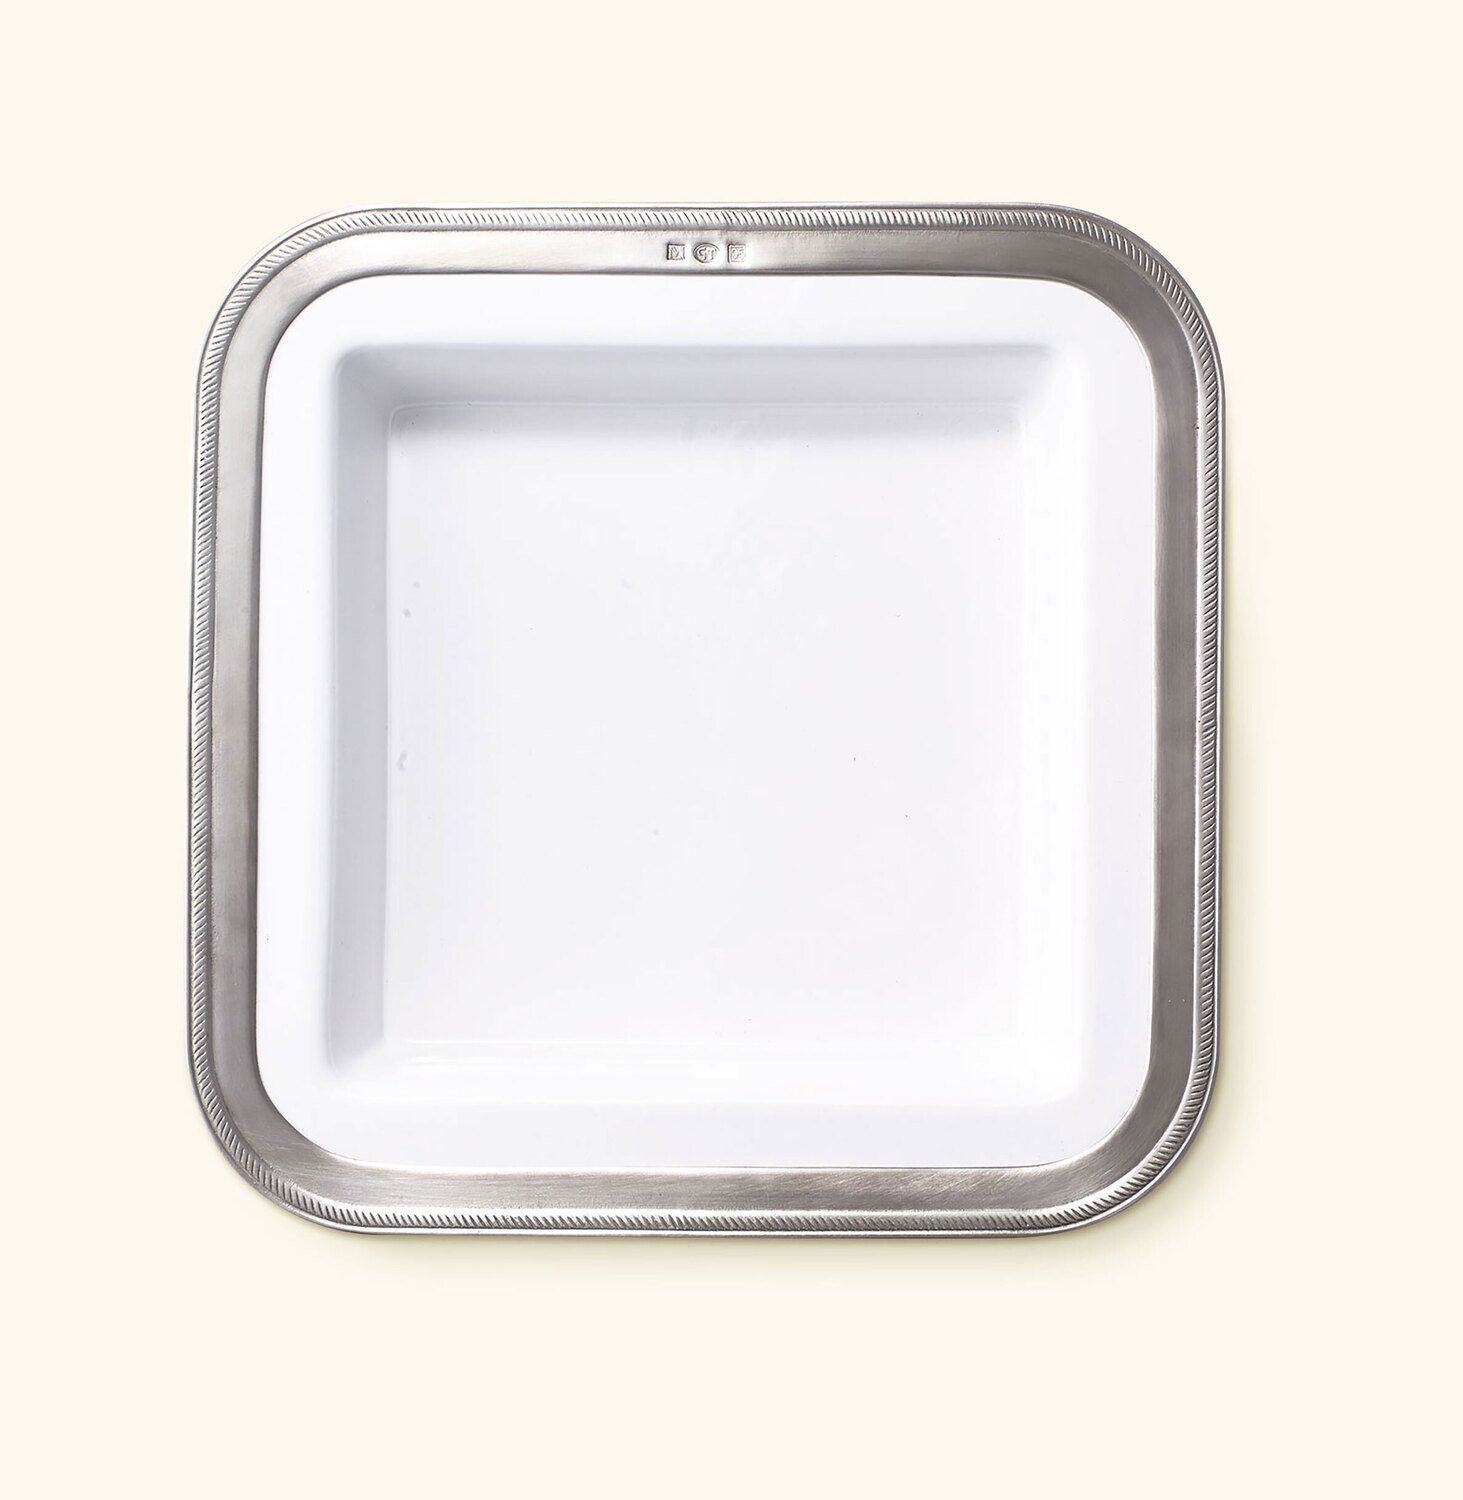 Match Pewter Luisa Square Serving Dish A877.0